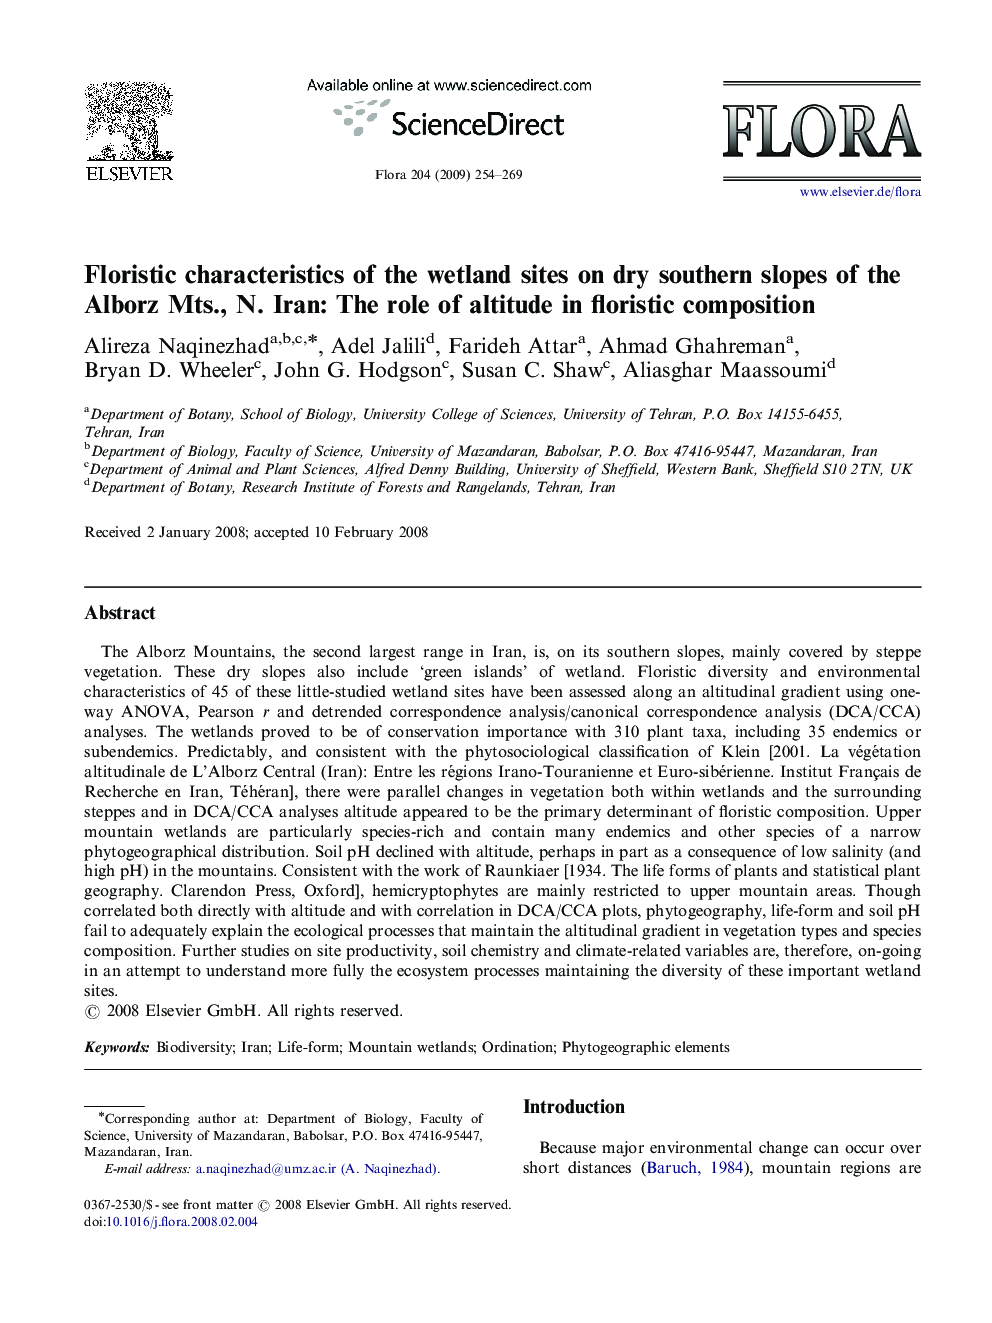 Floristic characteristics of the wetland sites on dry southern slopes of the Alborz Mts., N. Iran: The role of altitude in floristic composition